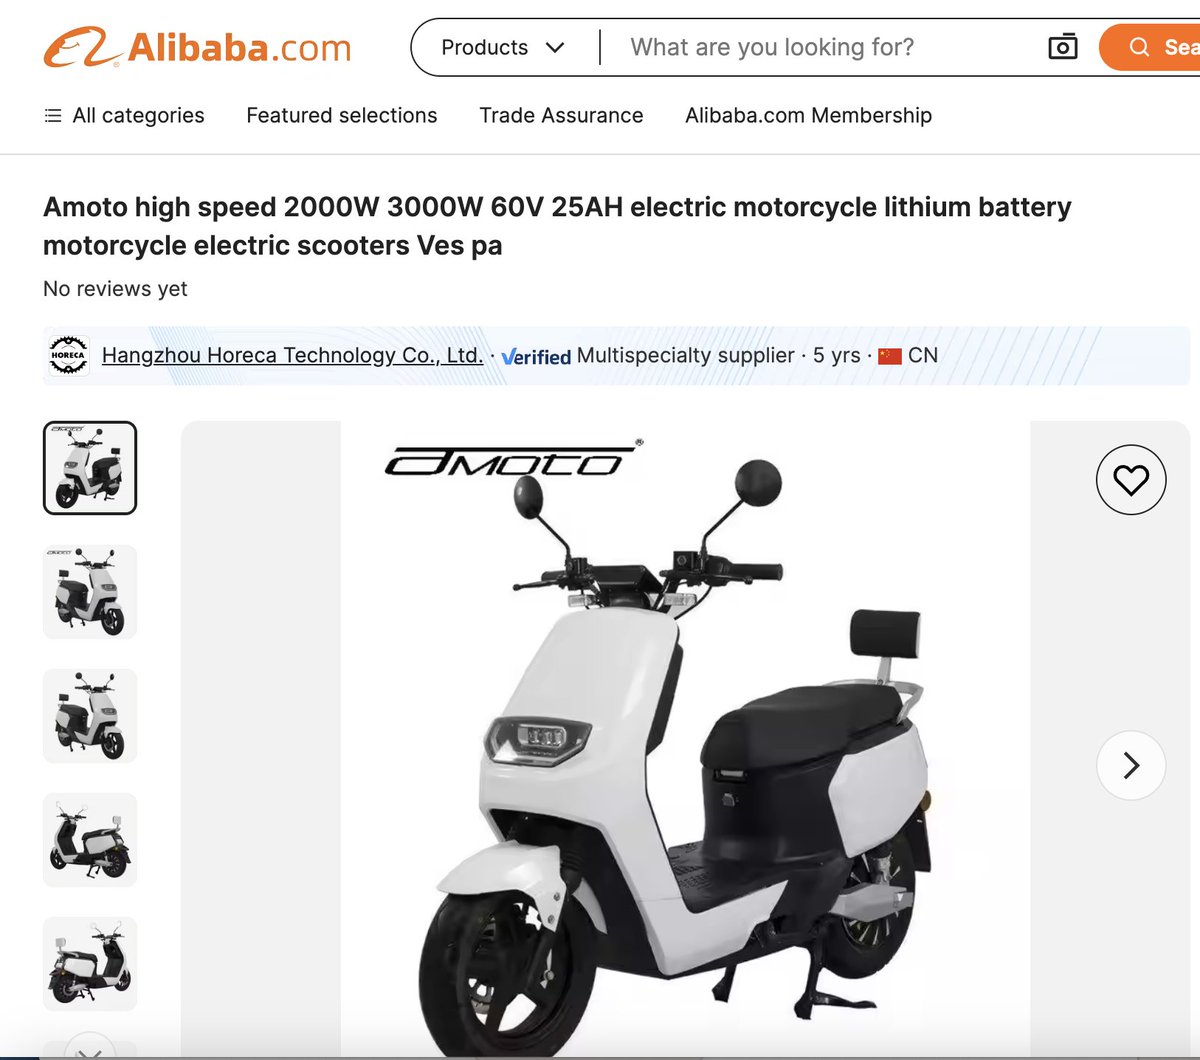 Delhi based MicroAutotech is about to launch the ES-21 electric scooter. I was curious. 

Turns out its another Chinese import - available for your company's branding on Alibaba & other Chinese sites. Sigh! 

#MicroAutotech #ES21 #ElectricScooter